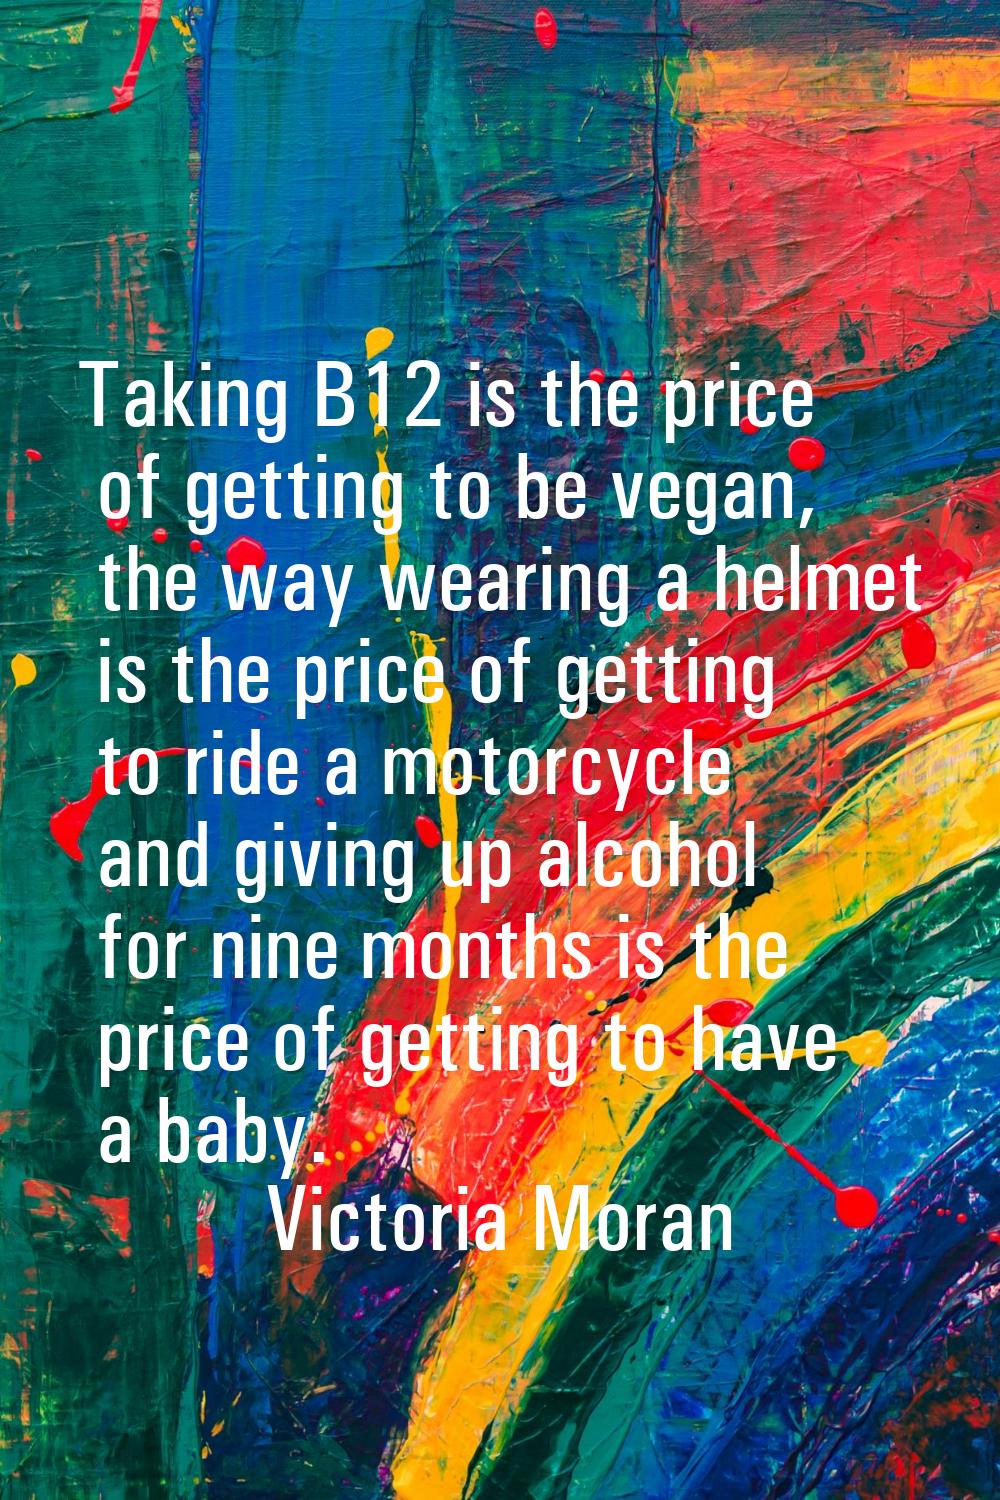 Taking B12 is the price of getting to be vegan, the way wearing a helmet is the price of getting to